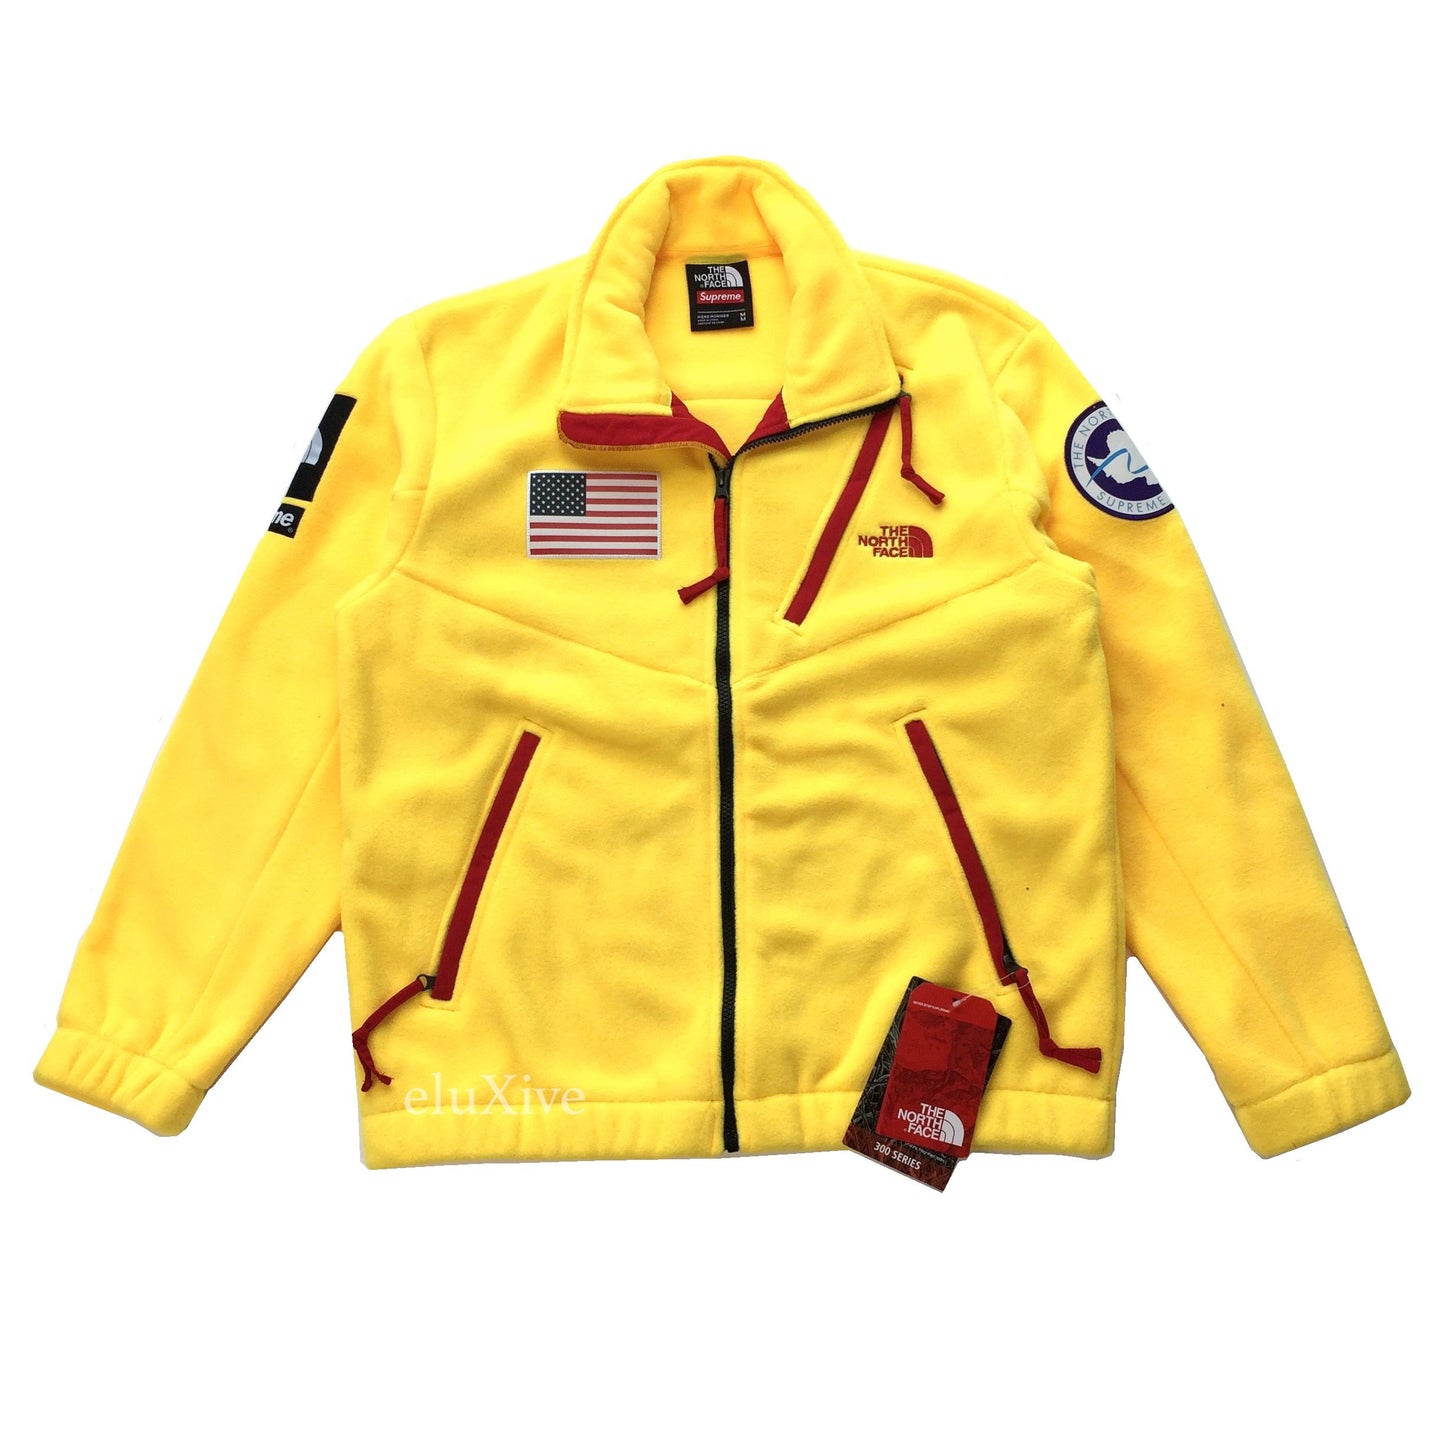 Supreme x The North Face - Yellow Trans Antarctica Expedition